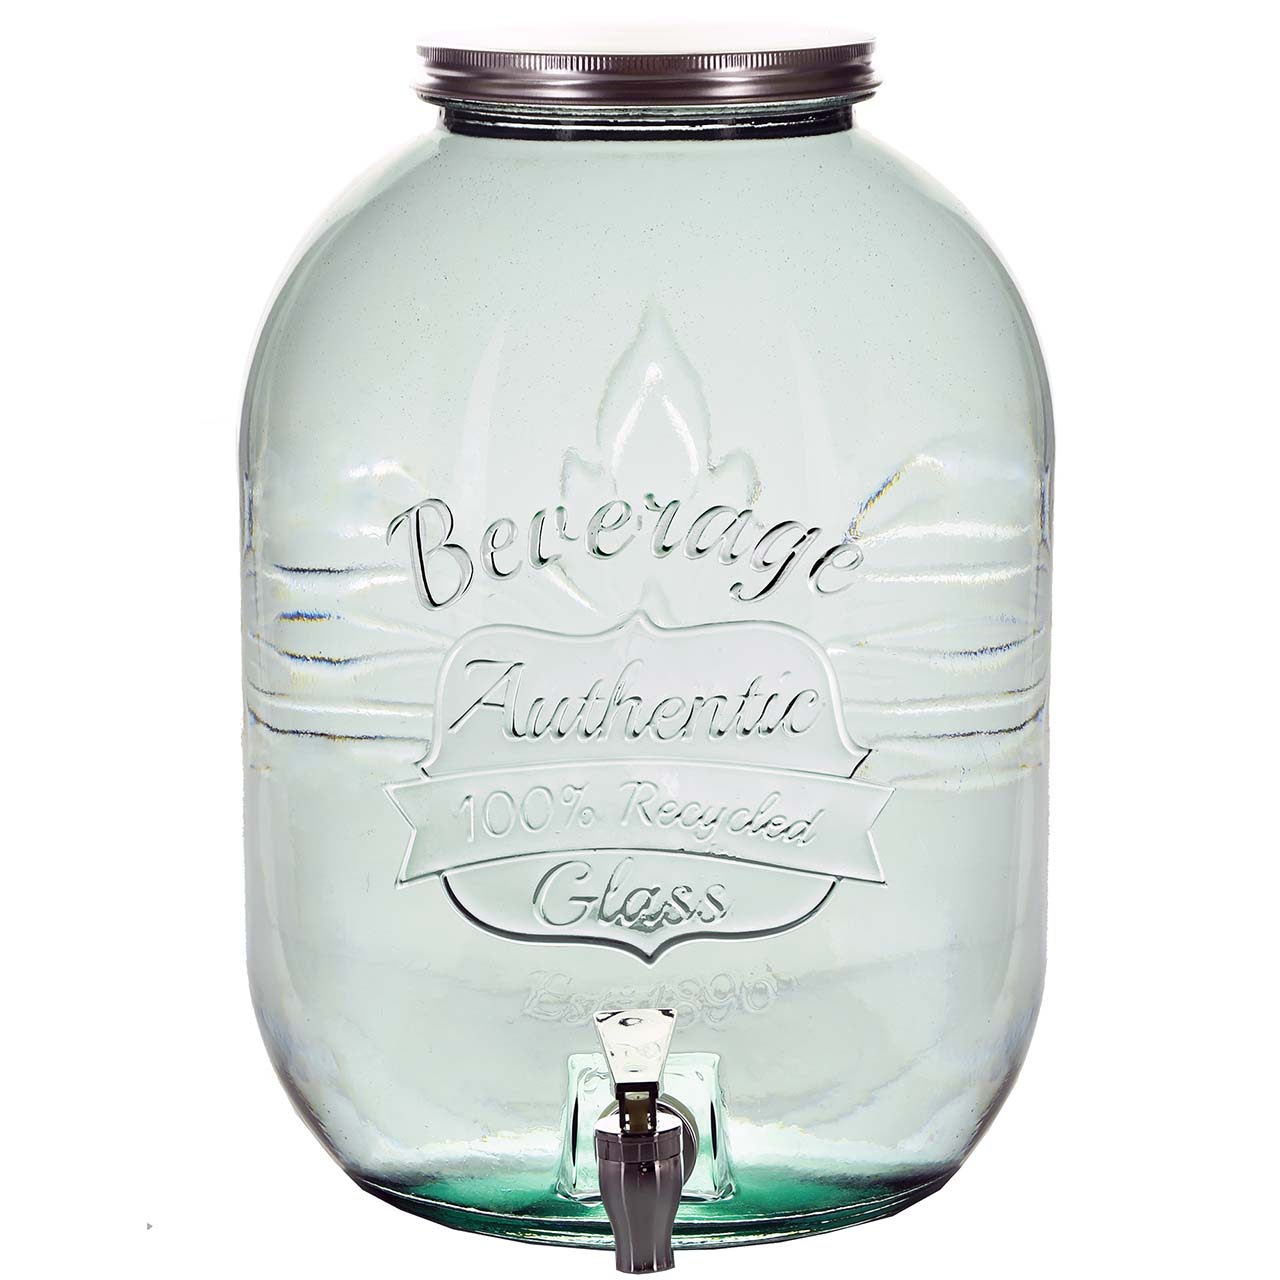 3 Gallon Authentic Glass Beverage Dispenser - 100% Recycled Glass